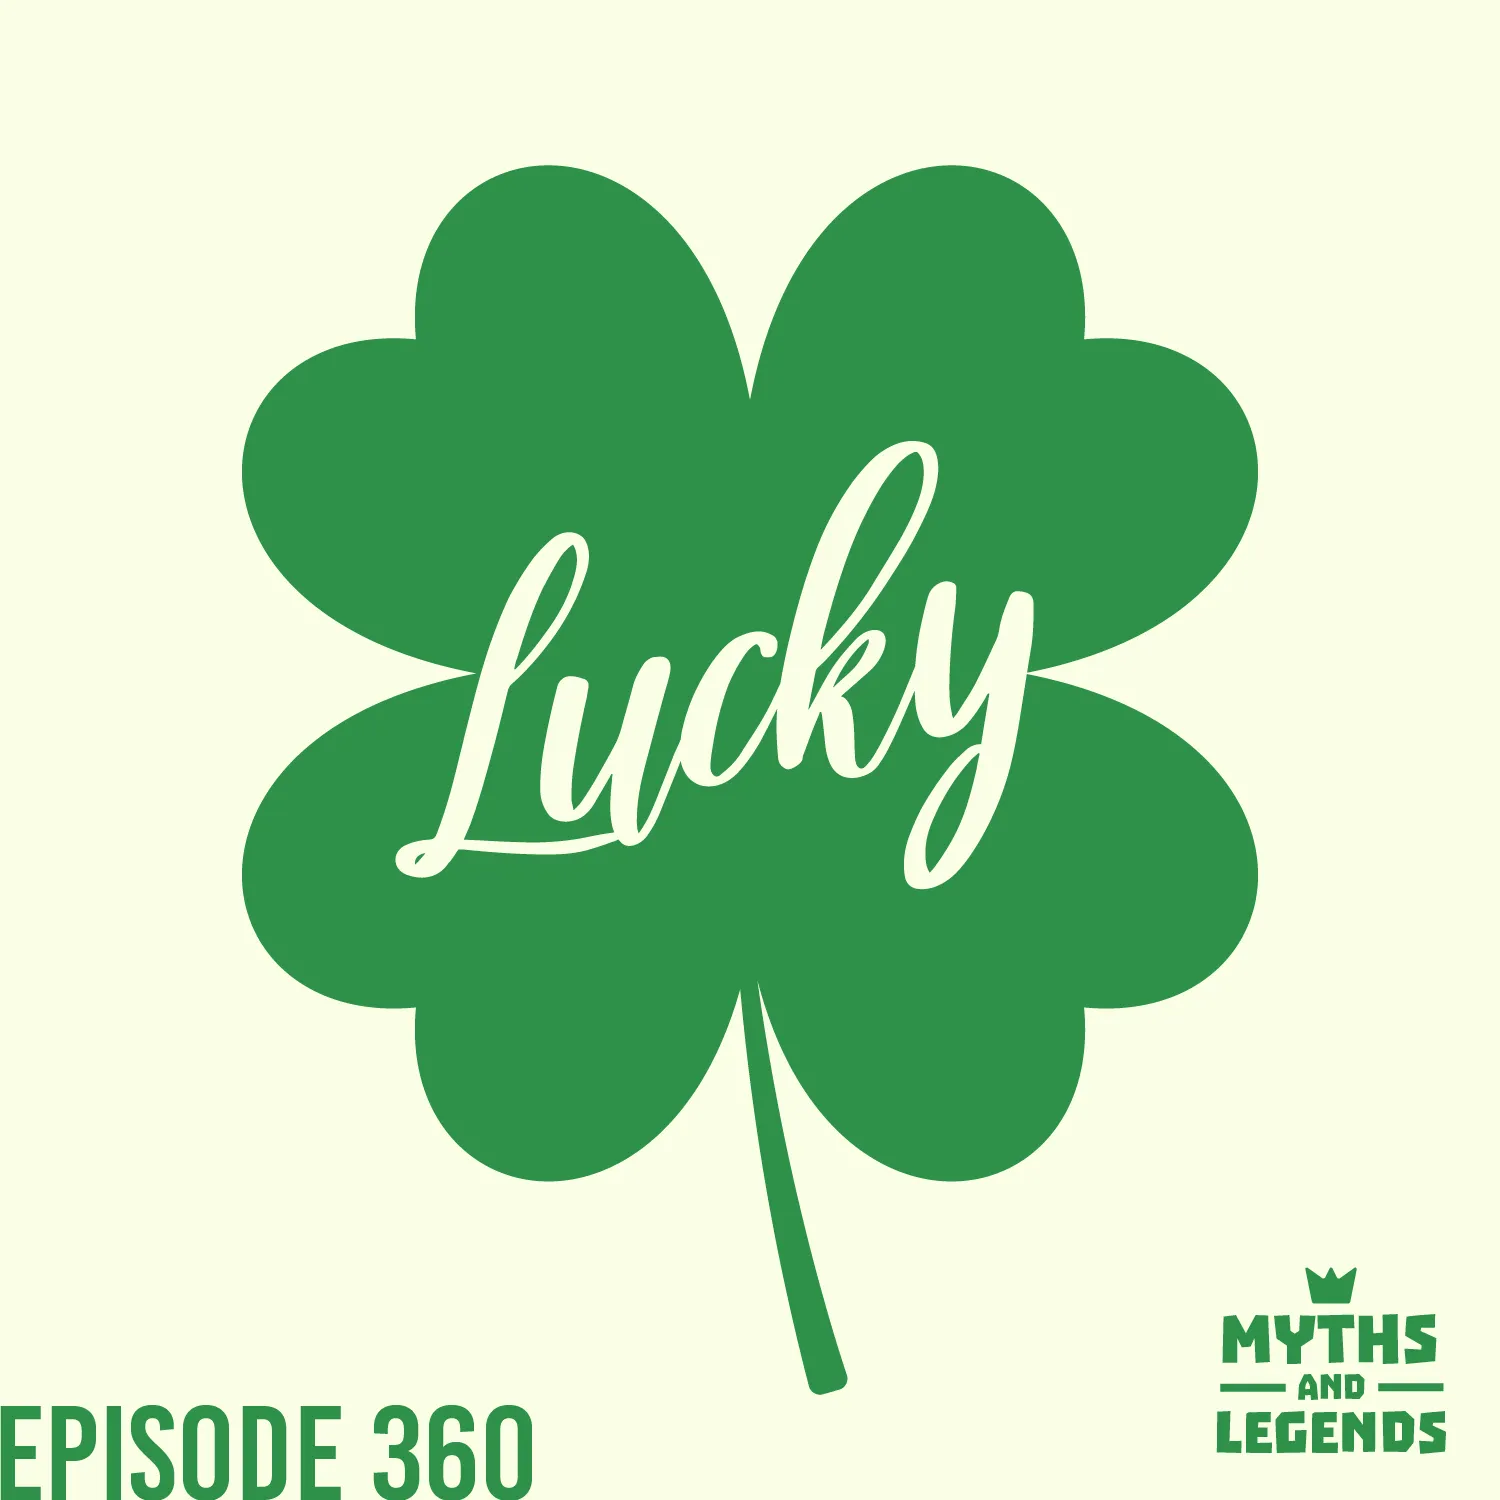 A green four-leaf clover with the word "lucky" in the middle. "episode 360" is in the bottom left corner in a sans serif font. The Myths and Legends logo is in the bottom right.